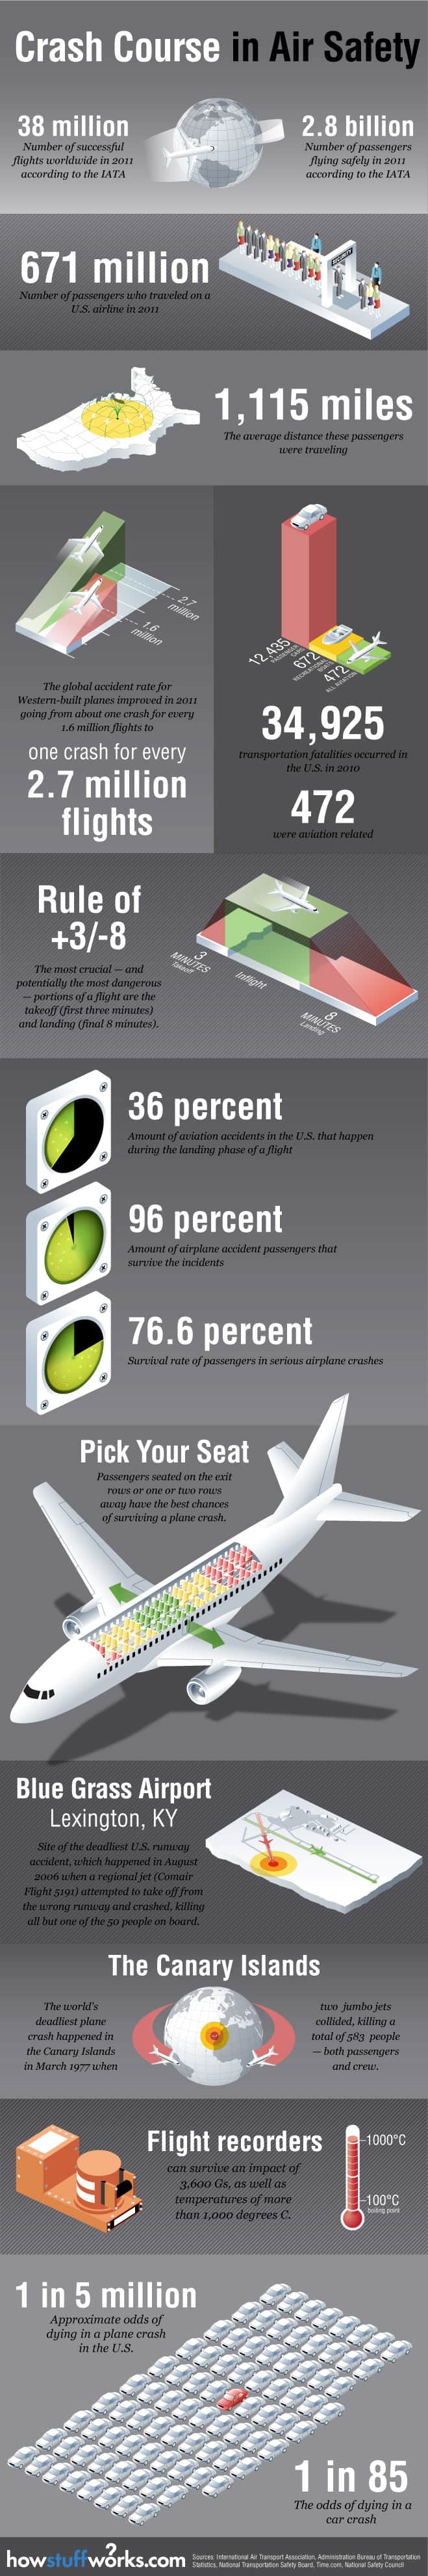 Crash Course in Airplane Safety Infographic